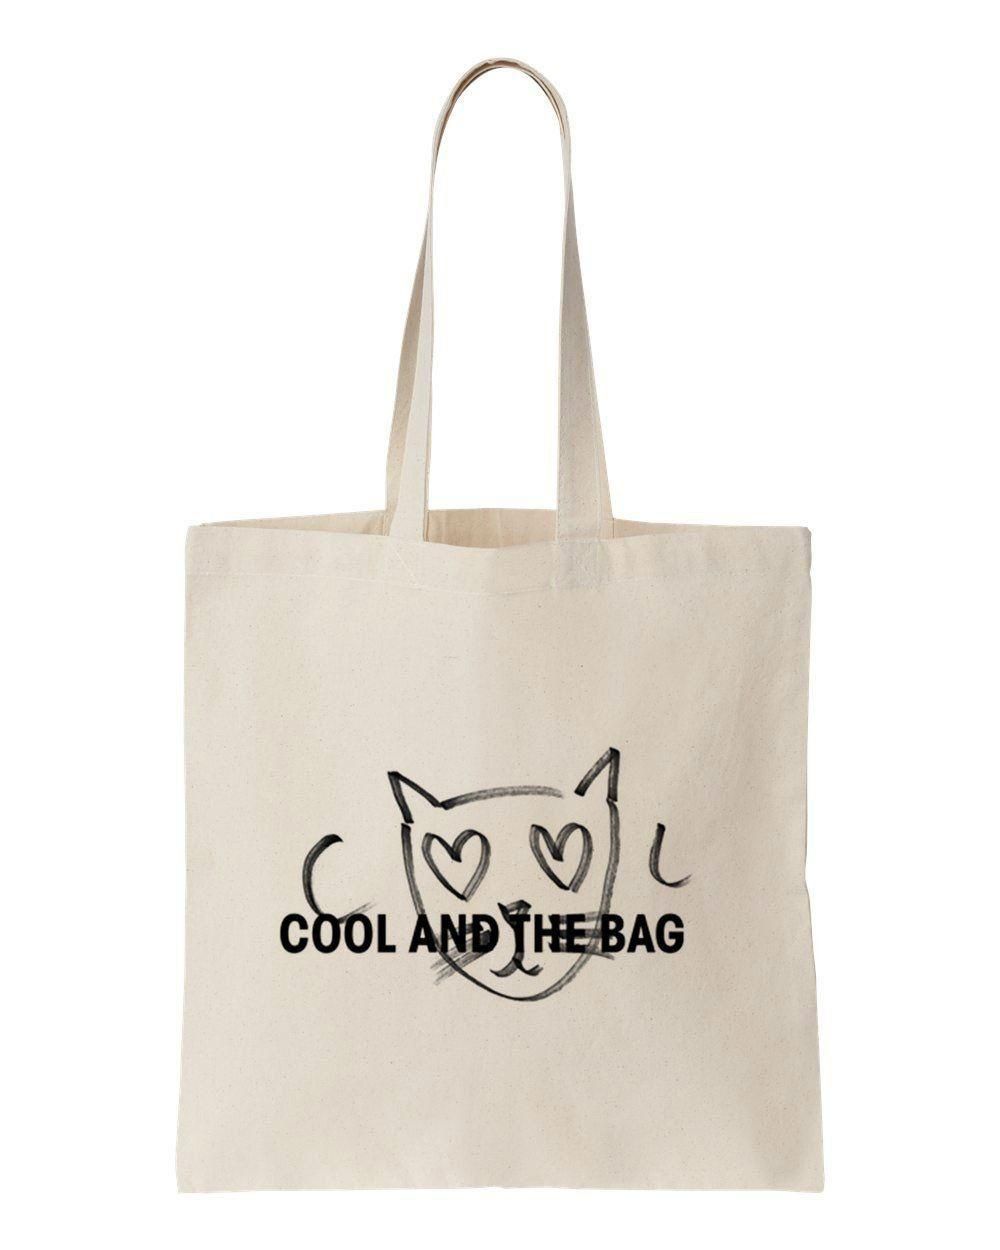 Chat Cool And The Bag Printed Tote Bag Birthday Gift For Girl